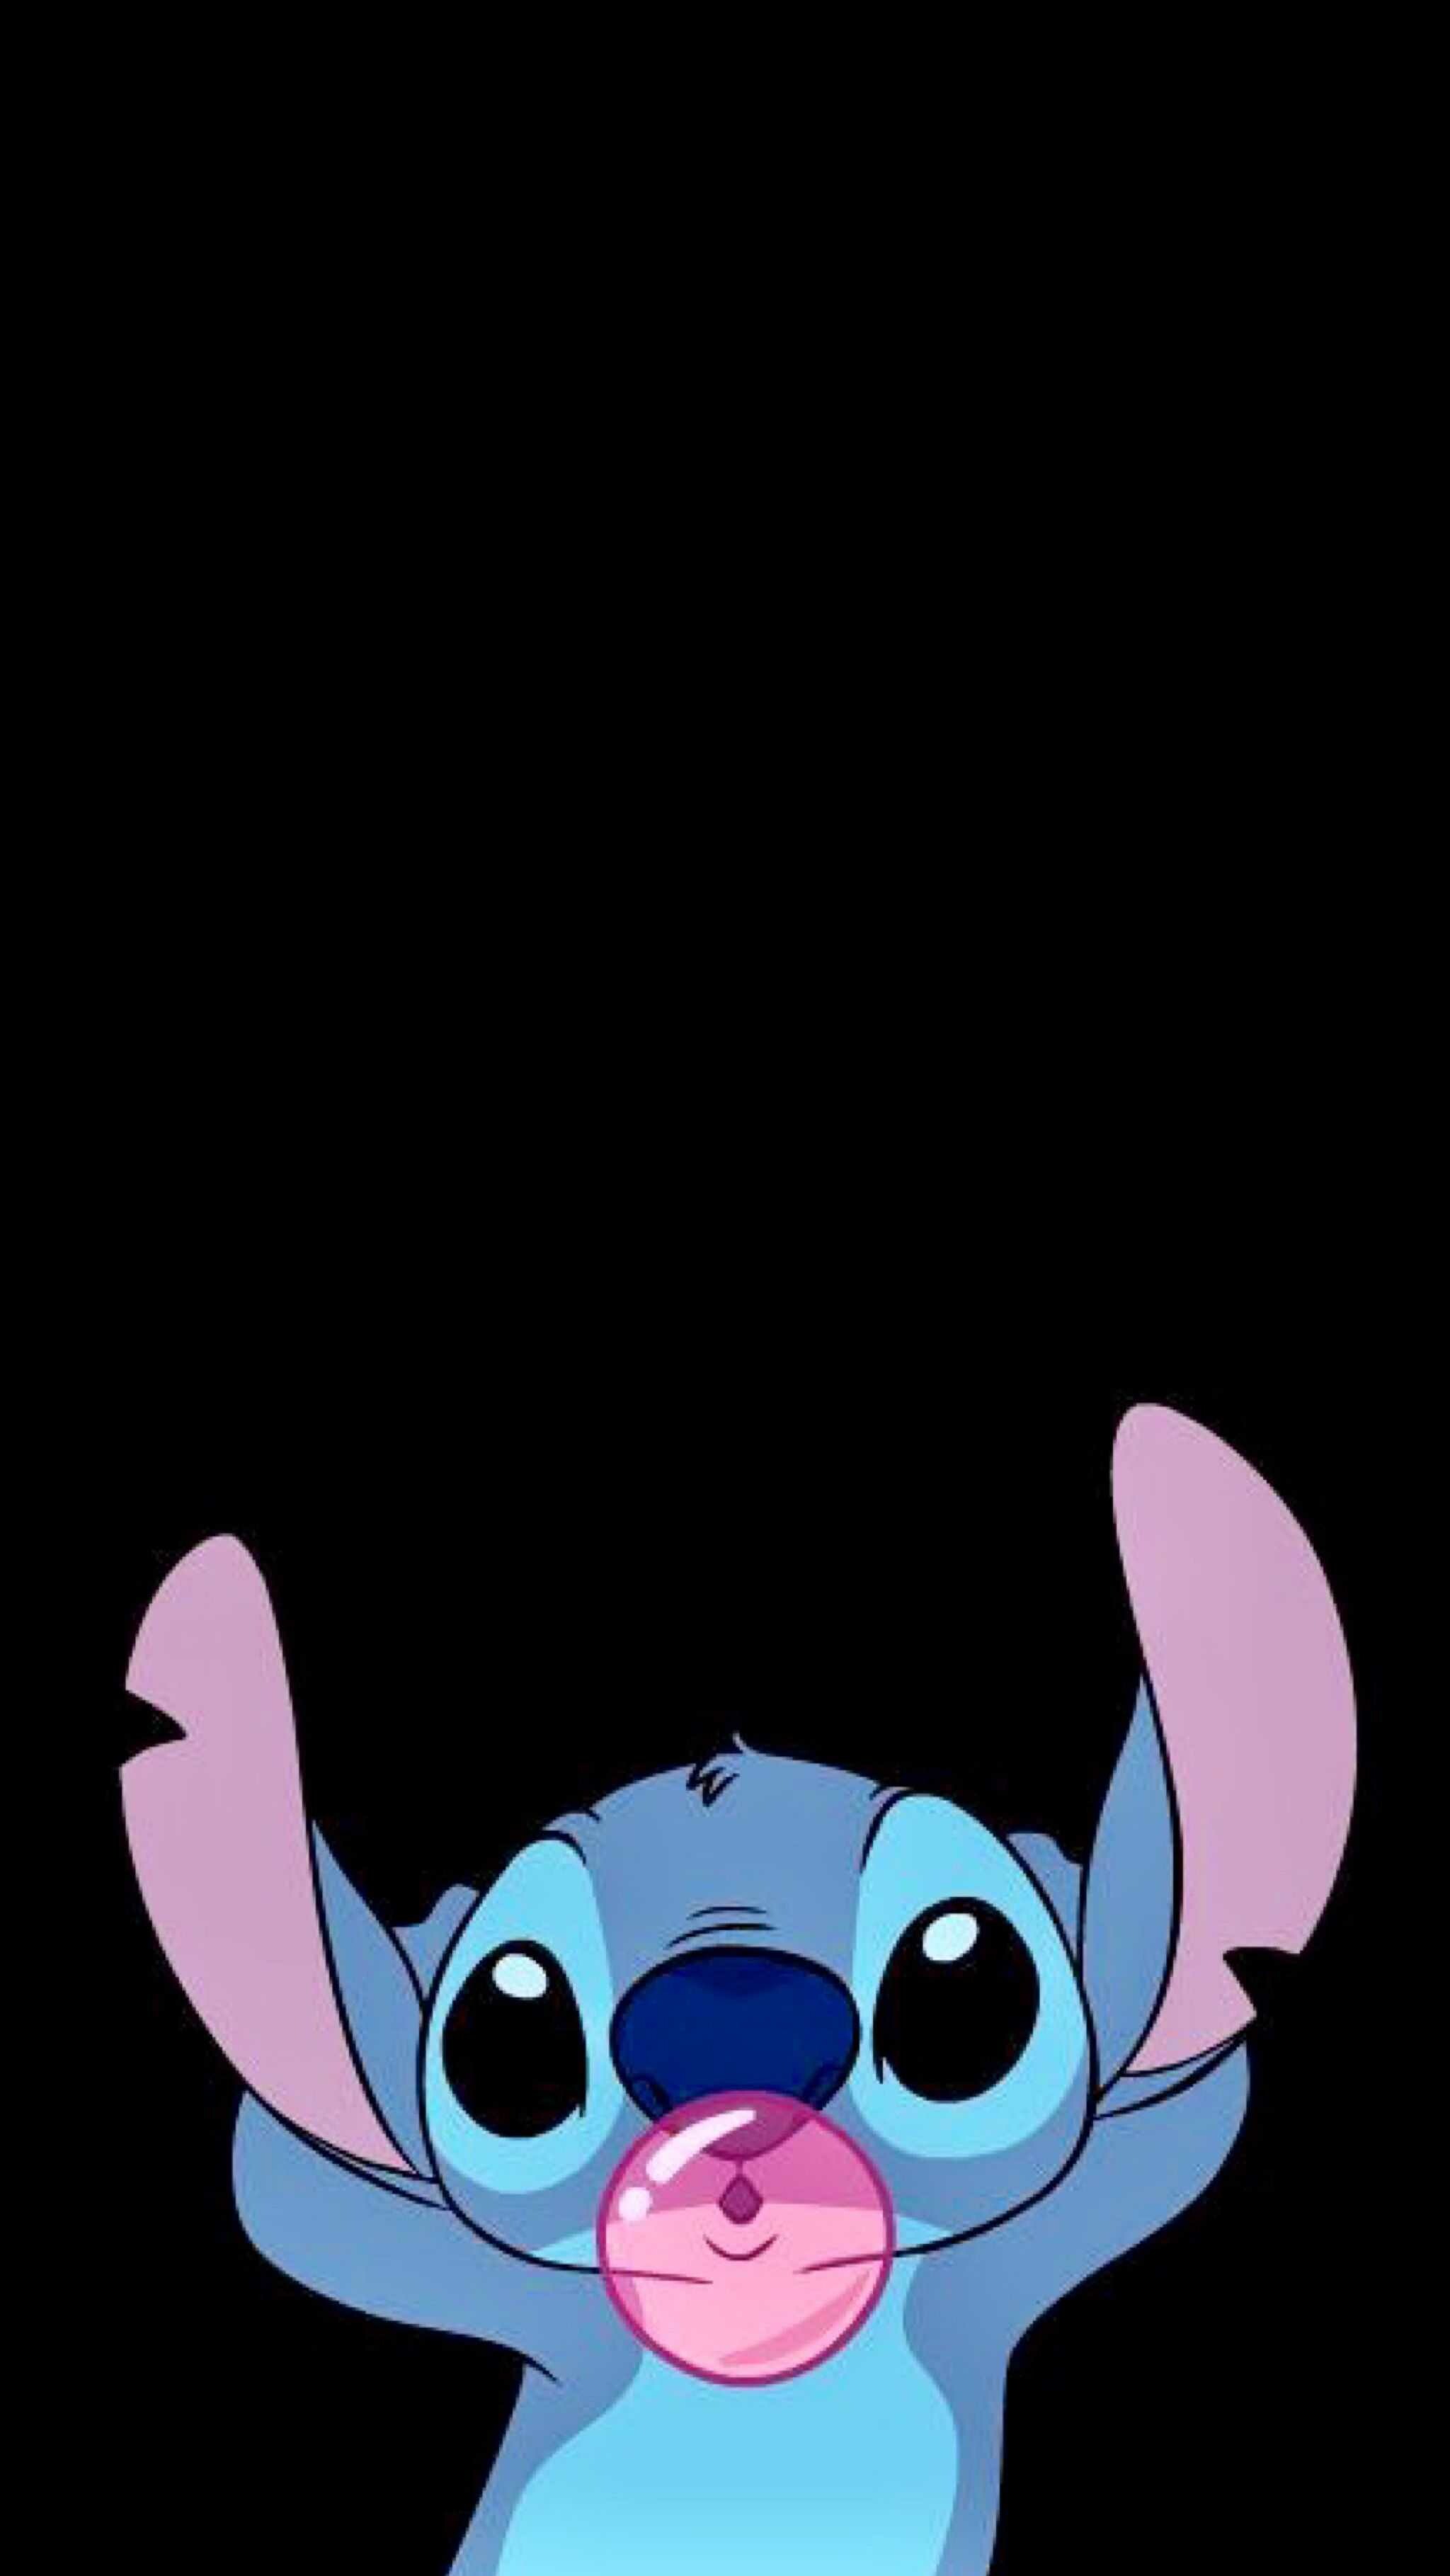 HD wallpaper, Lilo And Stitch, Phone Hd Lilo And Stitch Wallpaper Photo, 2050X3640 Hd Phone, Disney Animation, Stitch Wallpaper, Cute And Mischievous